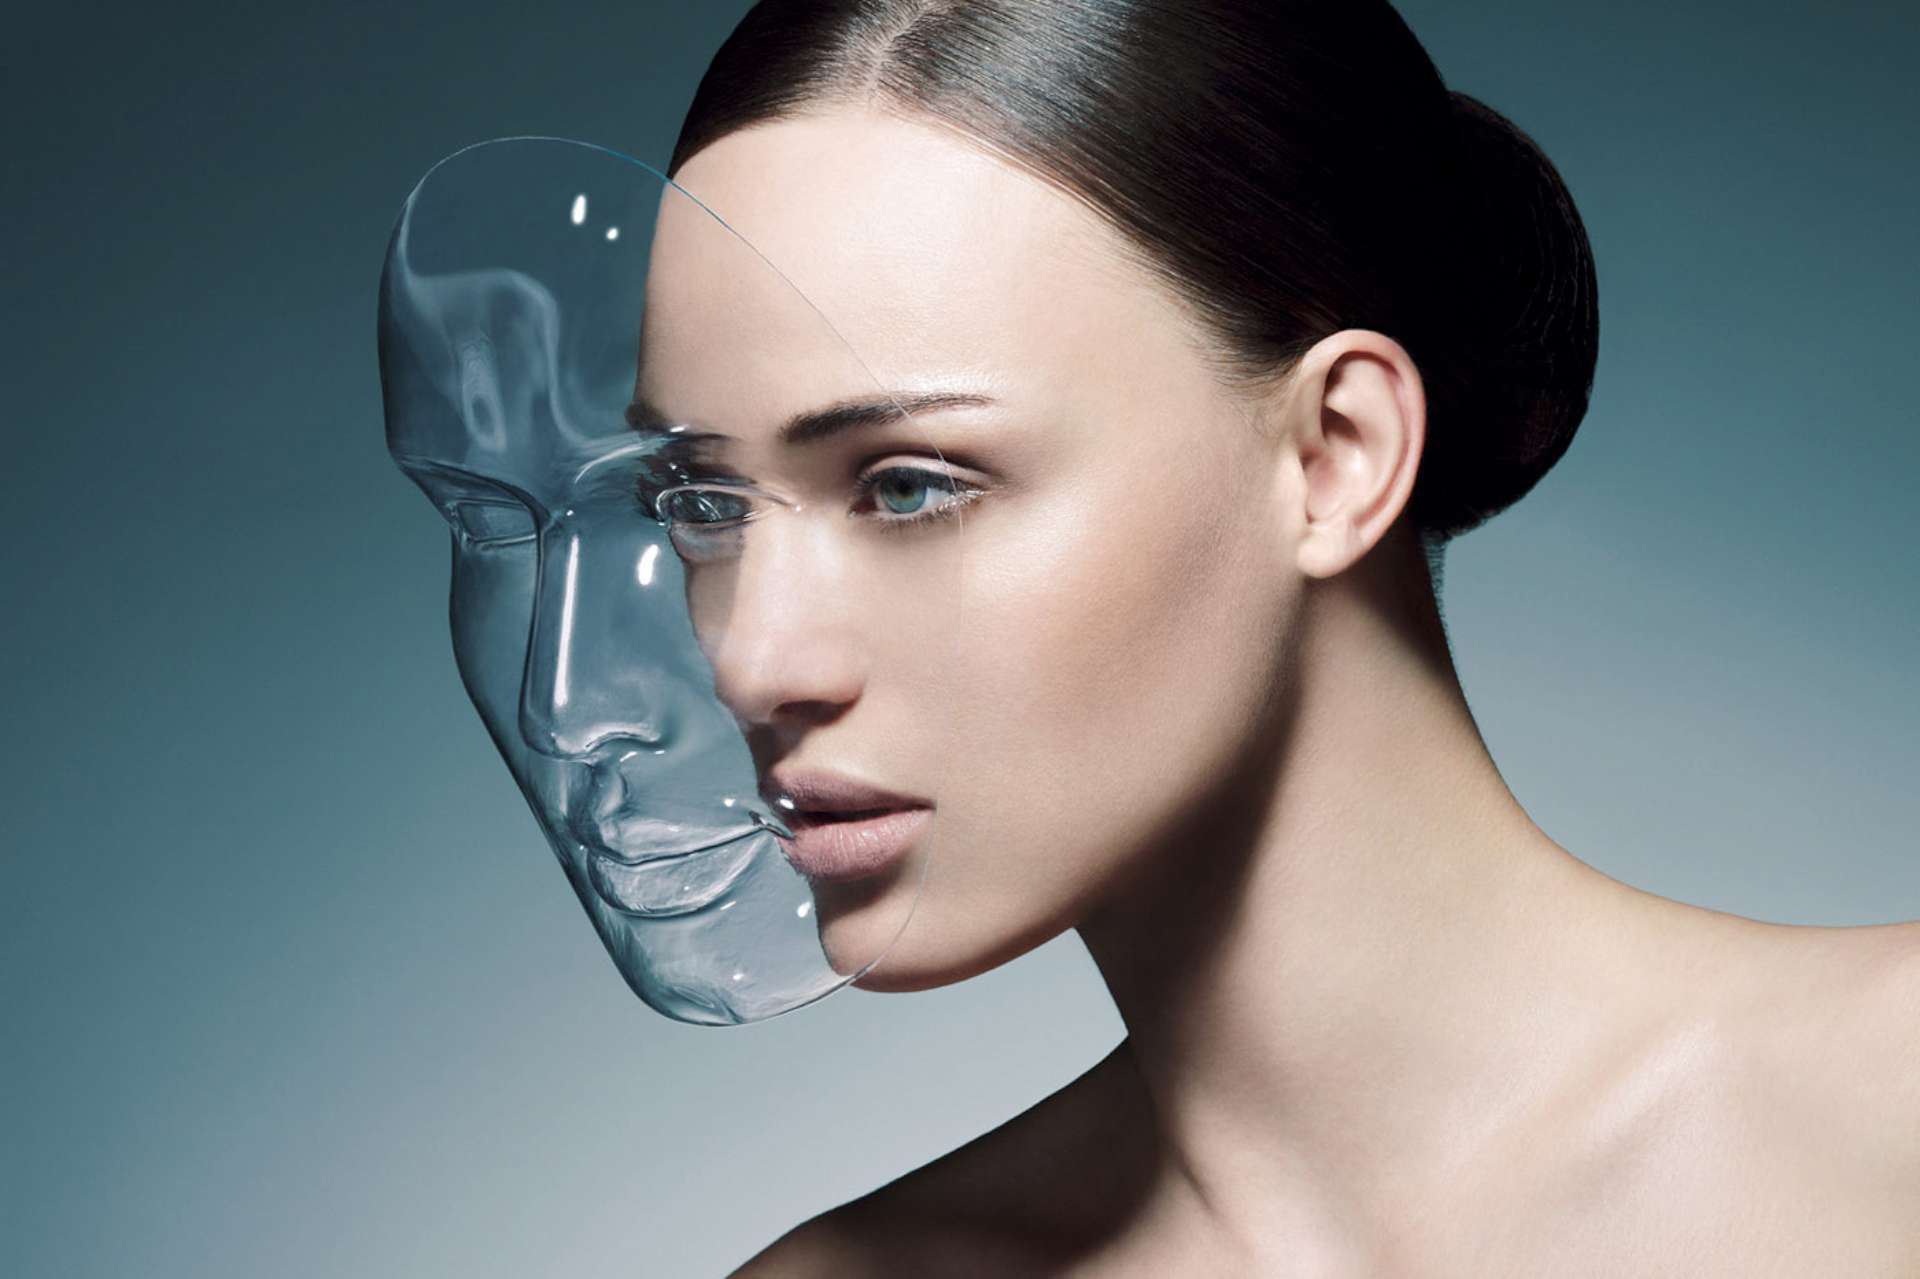 INTERNATIONALLY THE BEST SERVICES OF AESTHETIC PLASTIC SURGERY